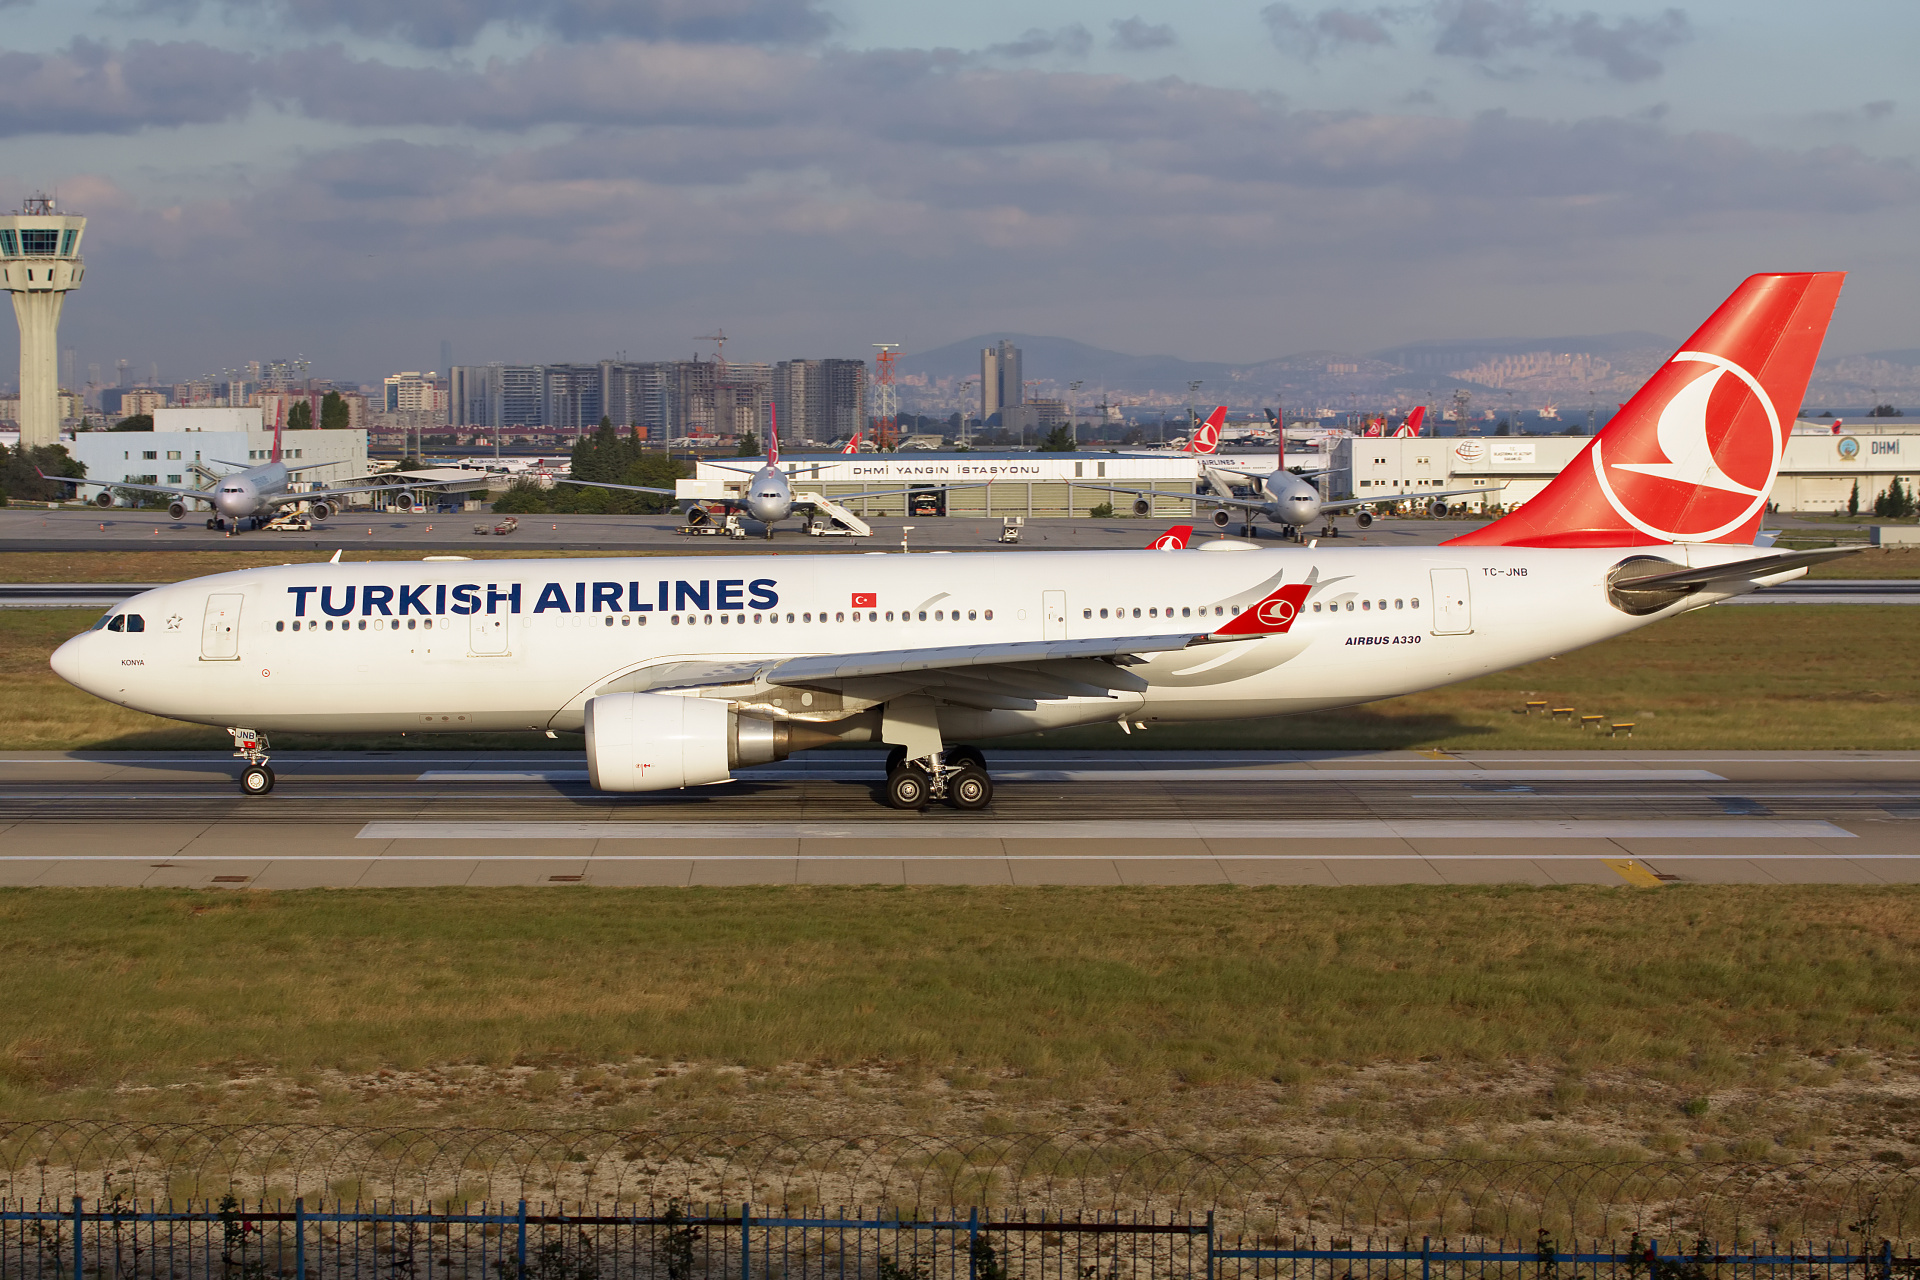 TC-JNB (Aircraft » Istanbul Atatürk Airport » Airbus A330-200 » THY Turkish Airlines)